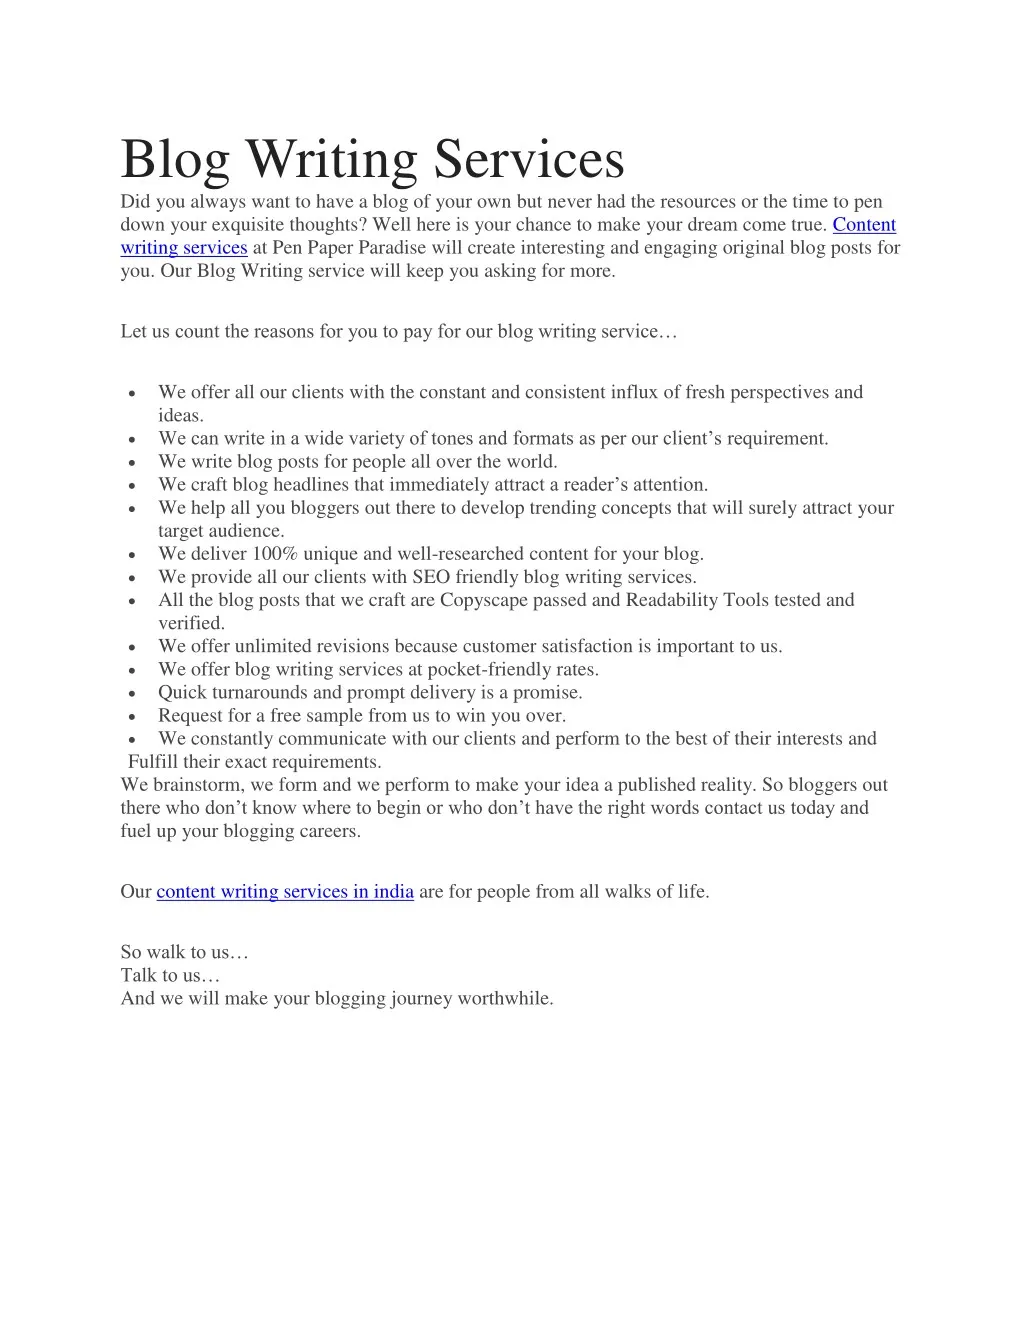 blog writing services did you always want to have